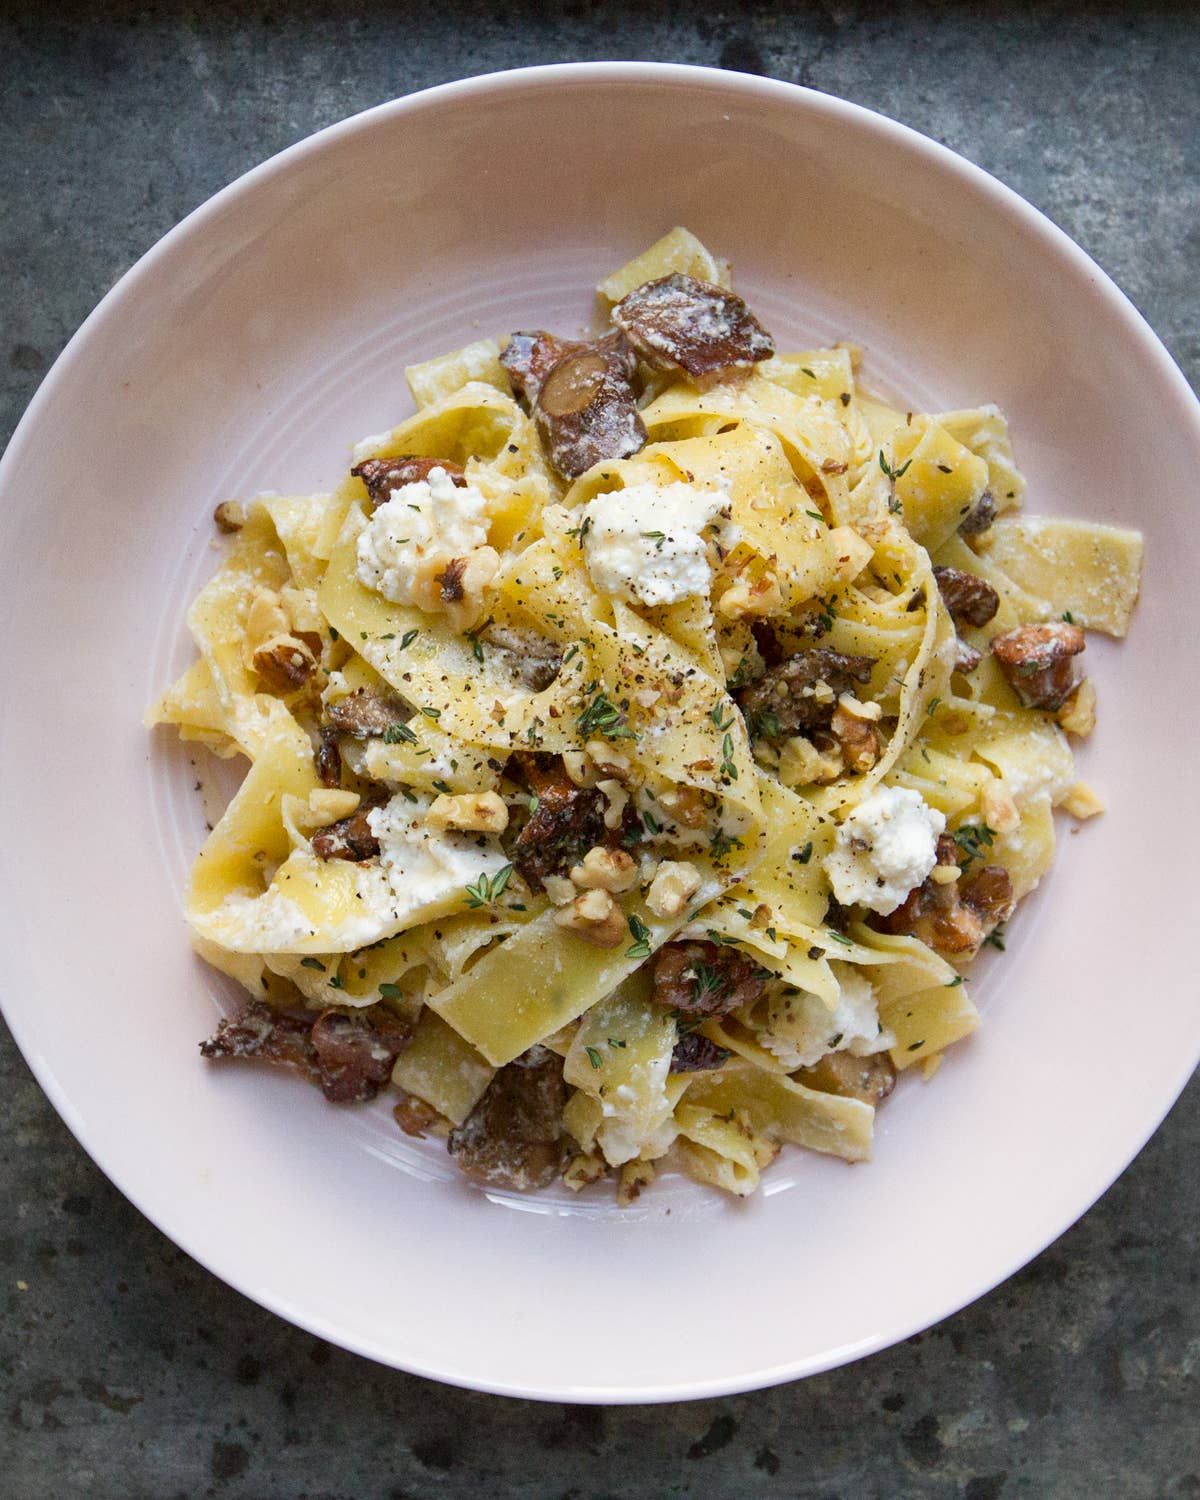 Pappardelle with Mixed Mushrooms, Ricotta, and Walnuts